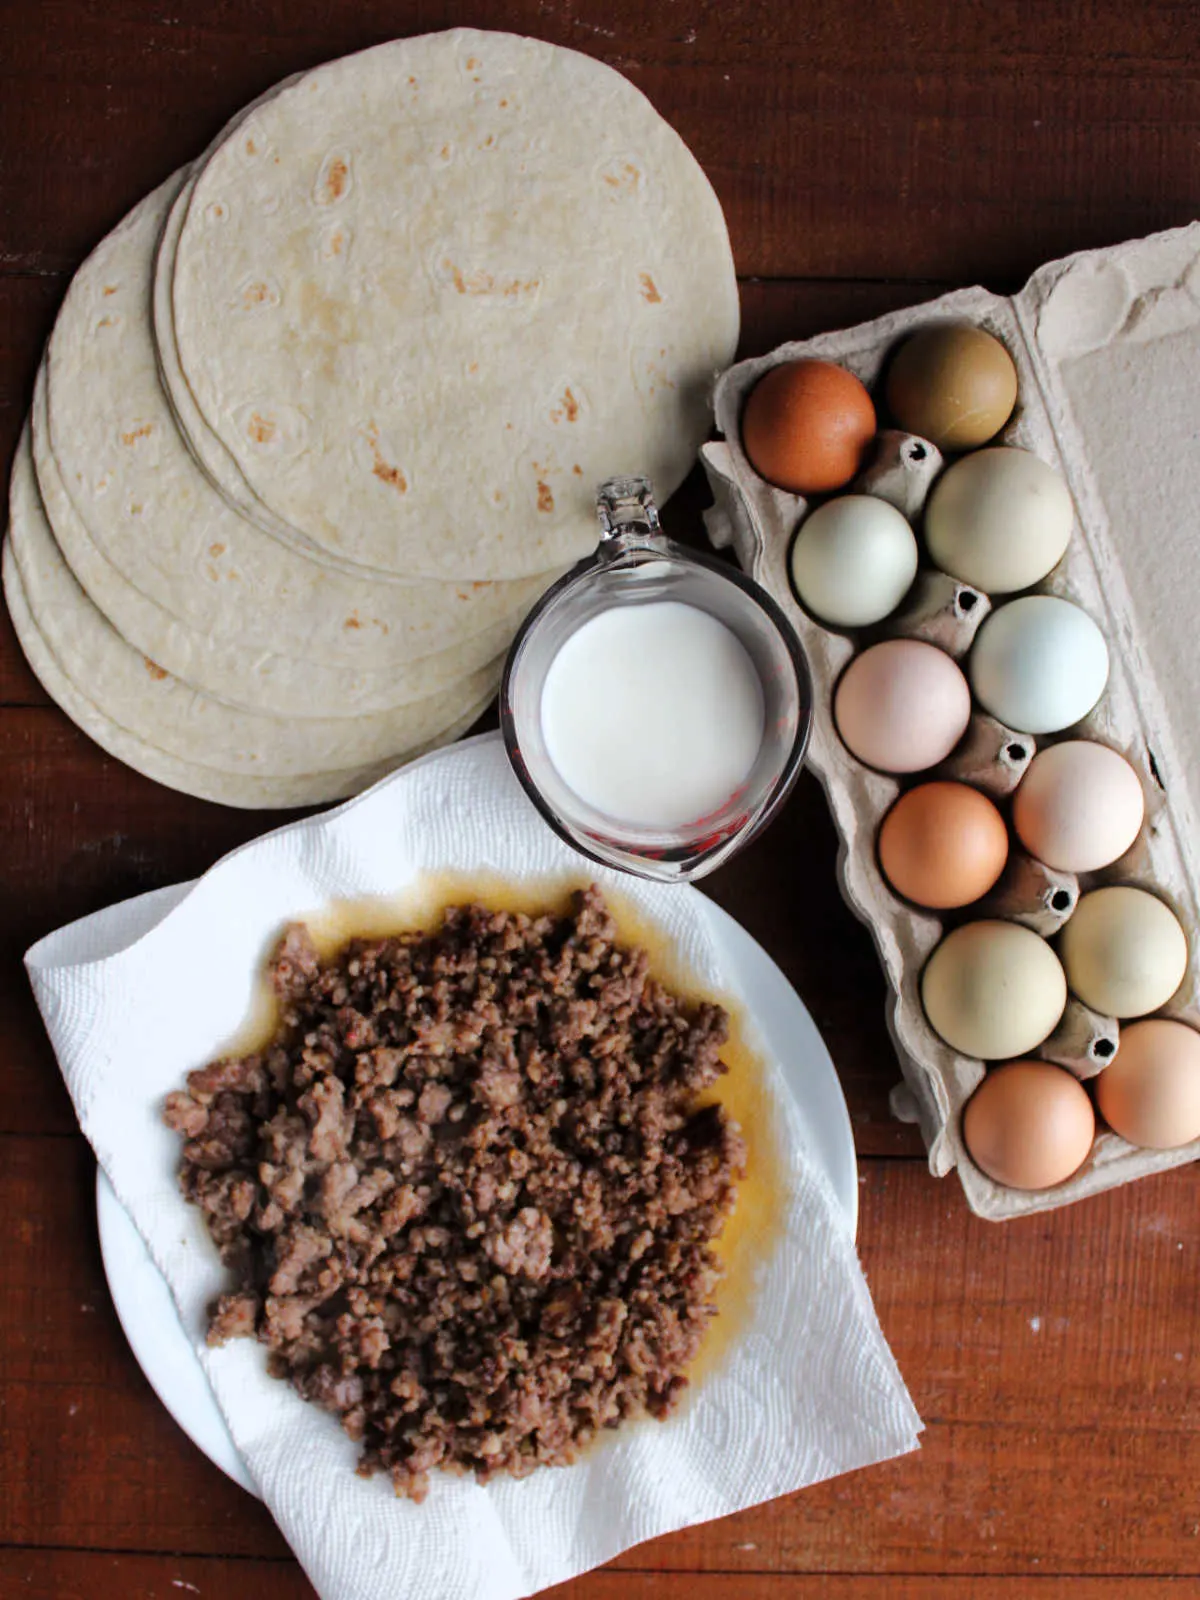 Ingredients including a dozen eggs, milk, browned sausage, and tortillas ready to be made into breakfast enchiladas.